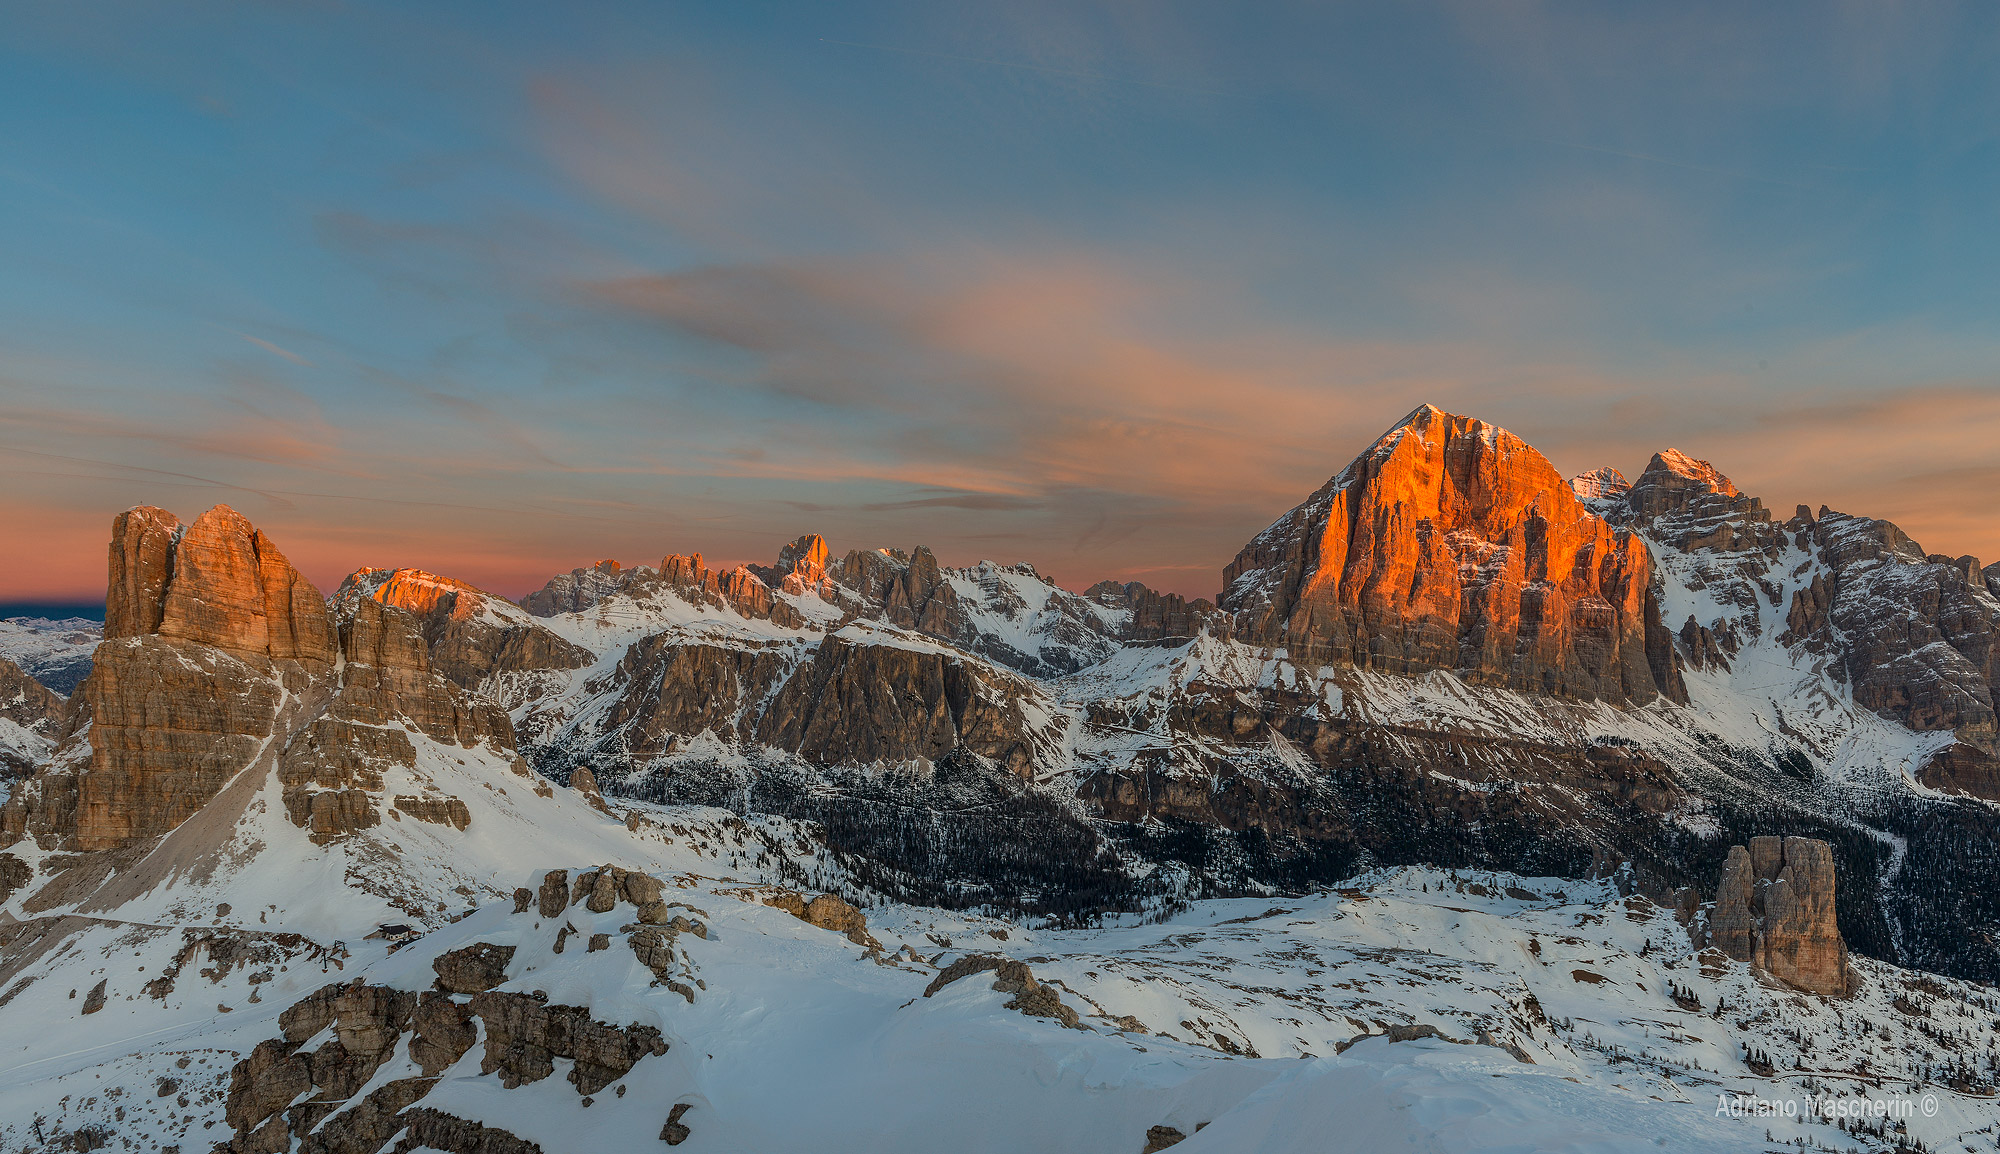 First lights of the Dolomites...